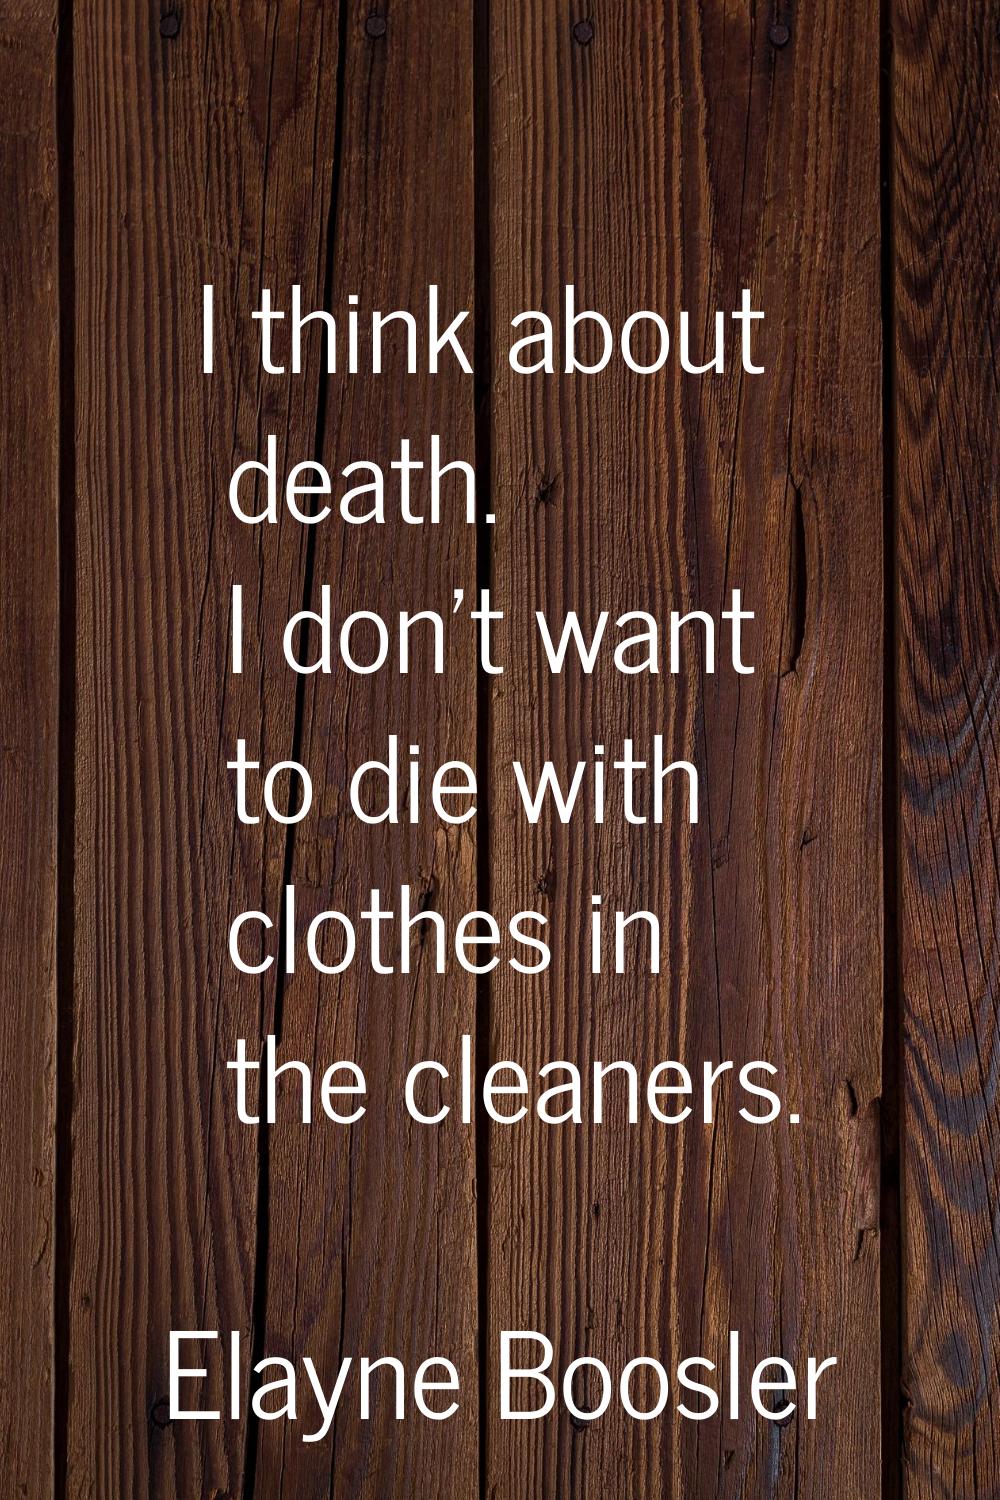 I think about death. I don't want to die with clothes in the cleaners.